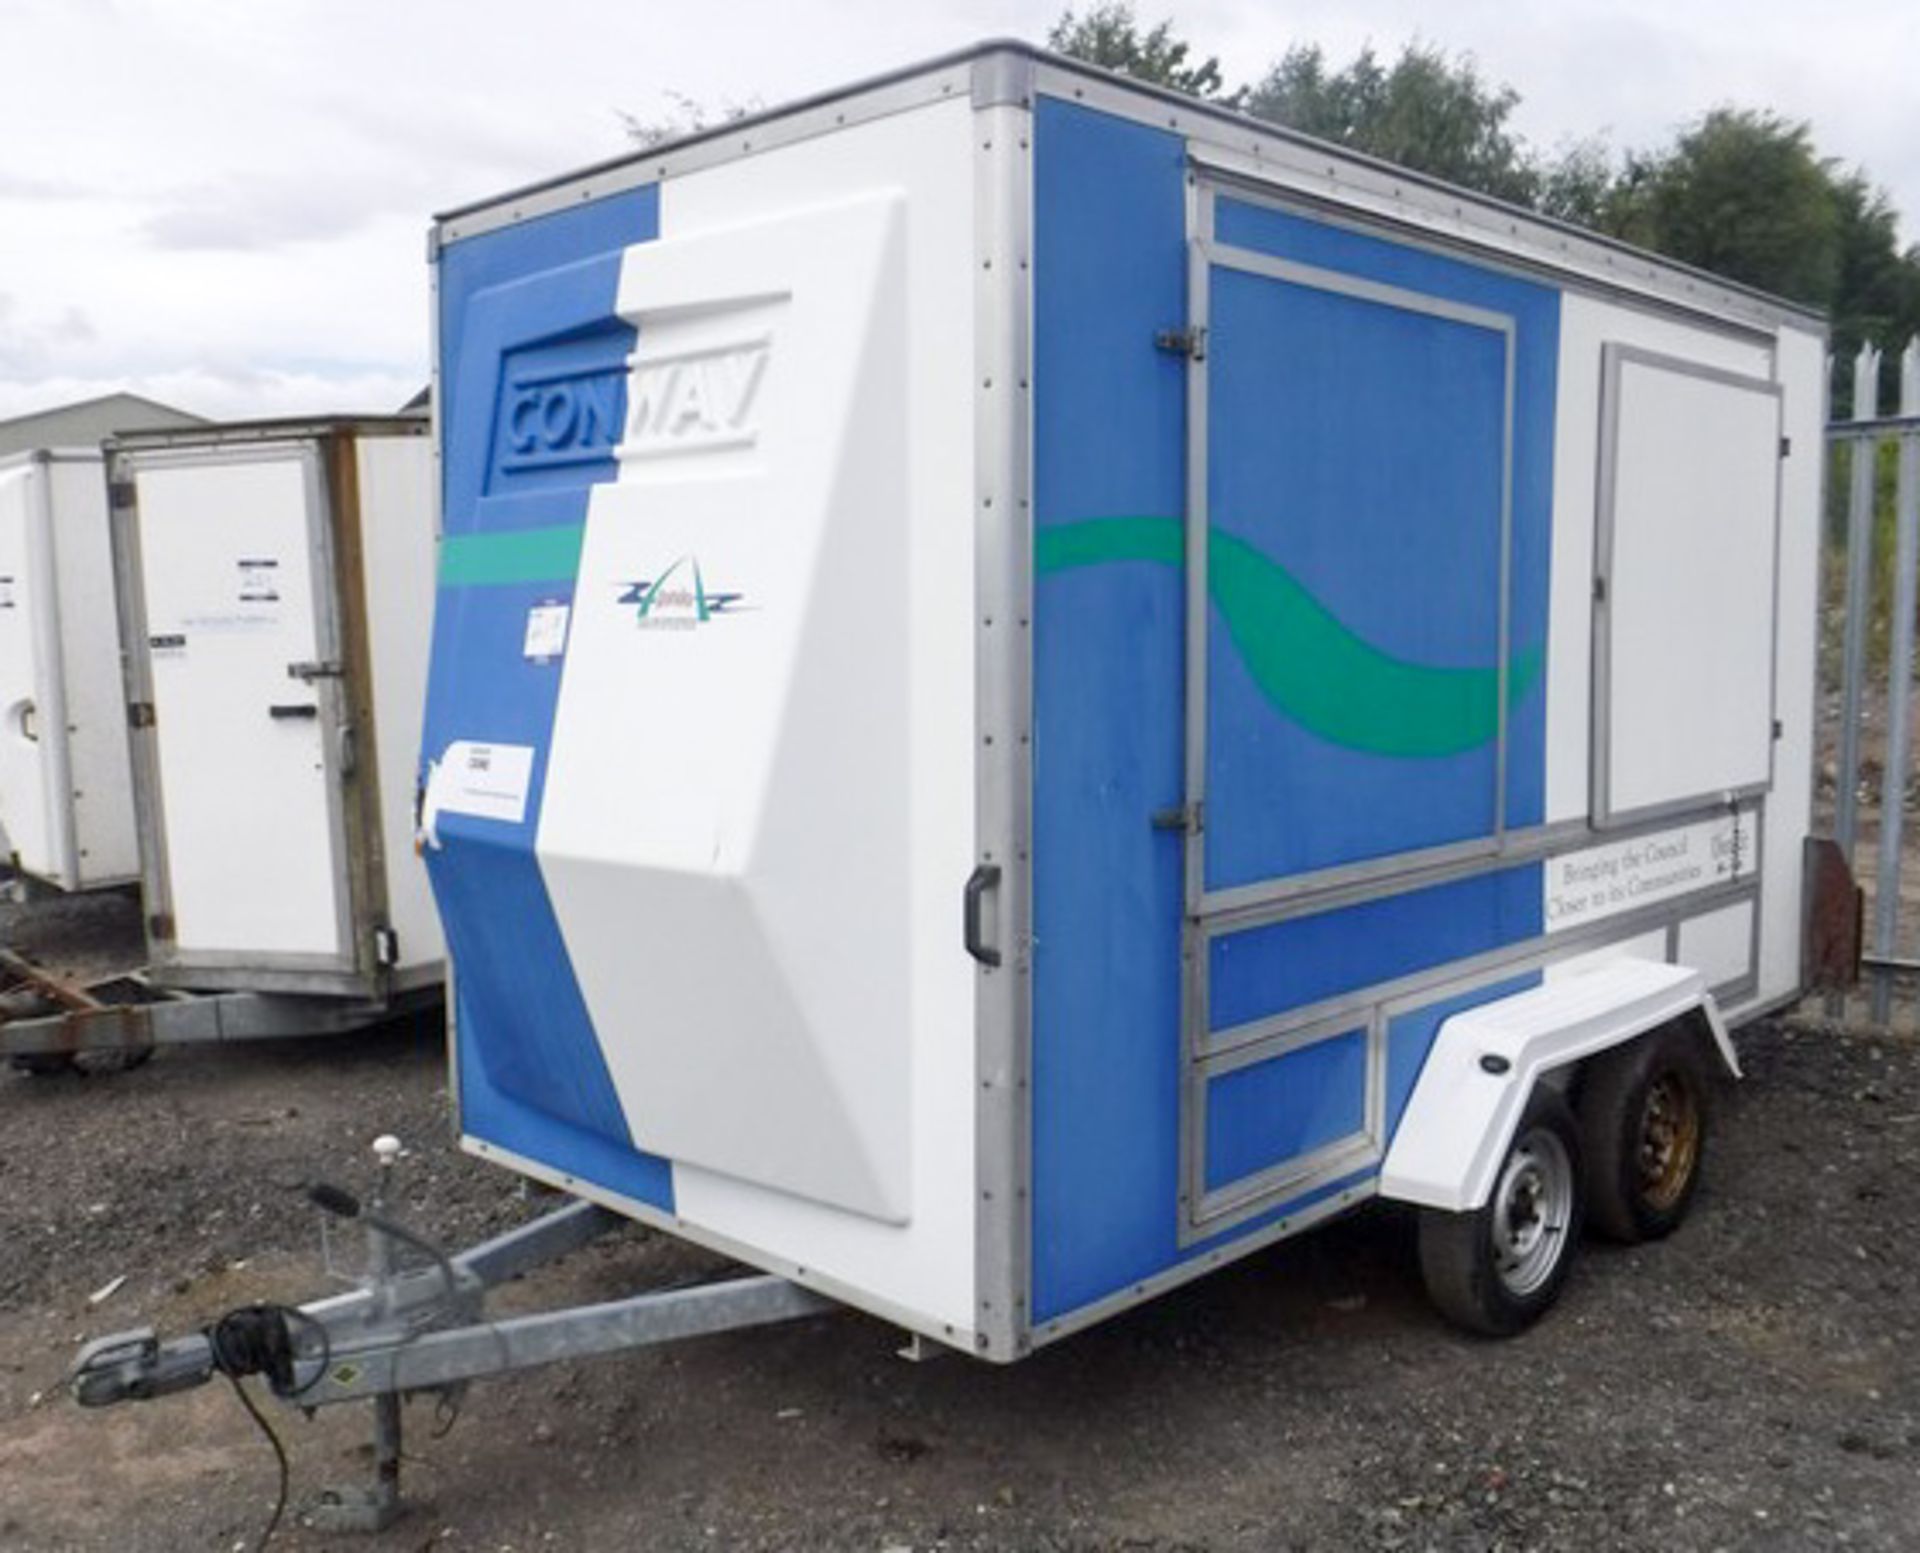 CONWAY 12ft events trailer. Twin axle. Model - ET 2600. S/N ZA13468 - Image 3 of 7